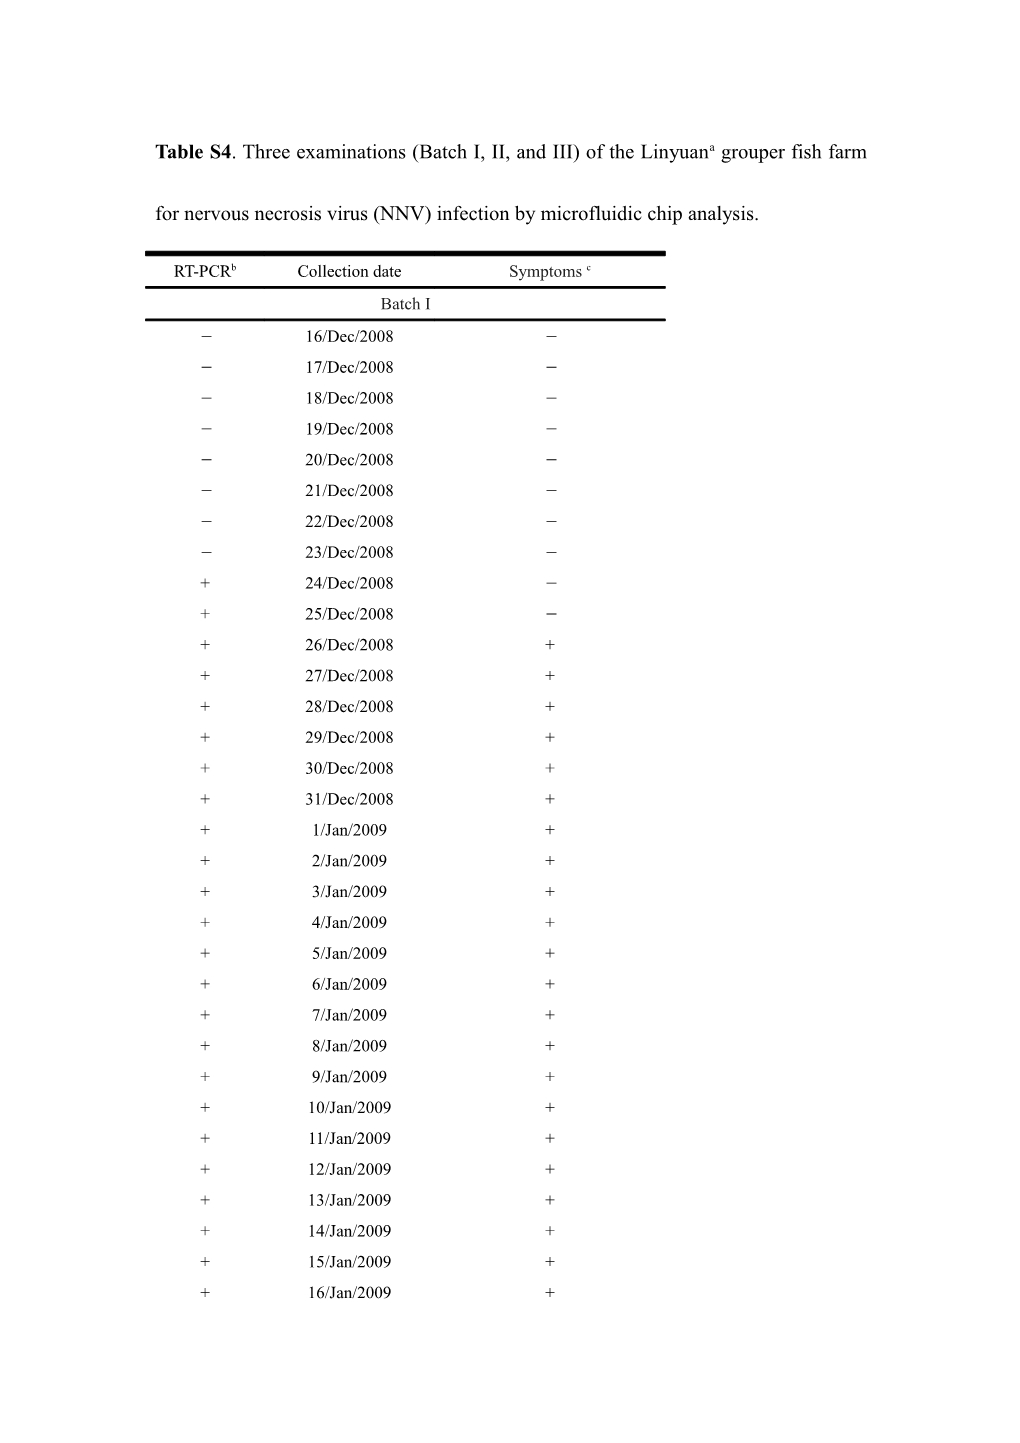 Table S4. Three Examinations (Batch I, II, and III) of the Linyuana Grouper Fish Farm For